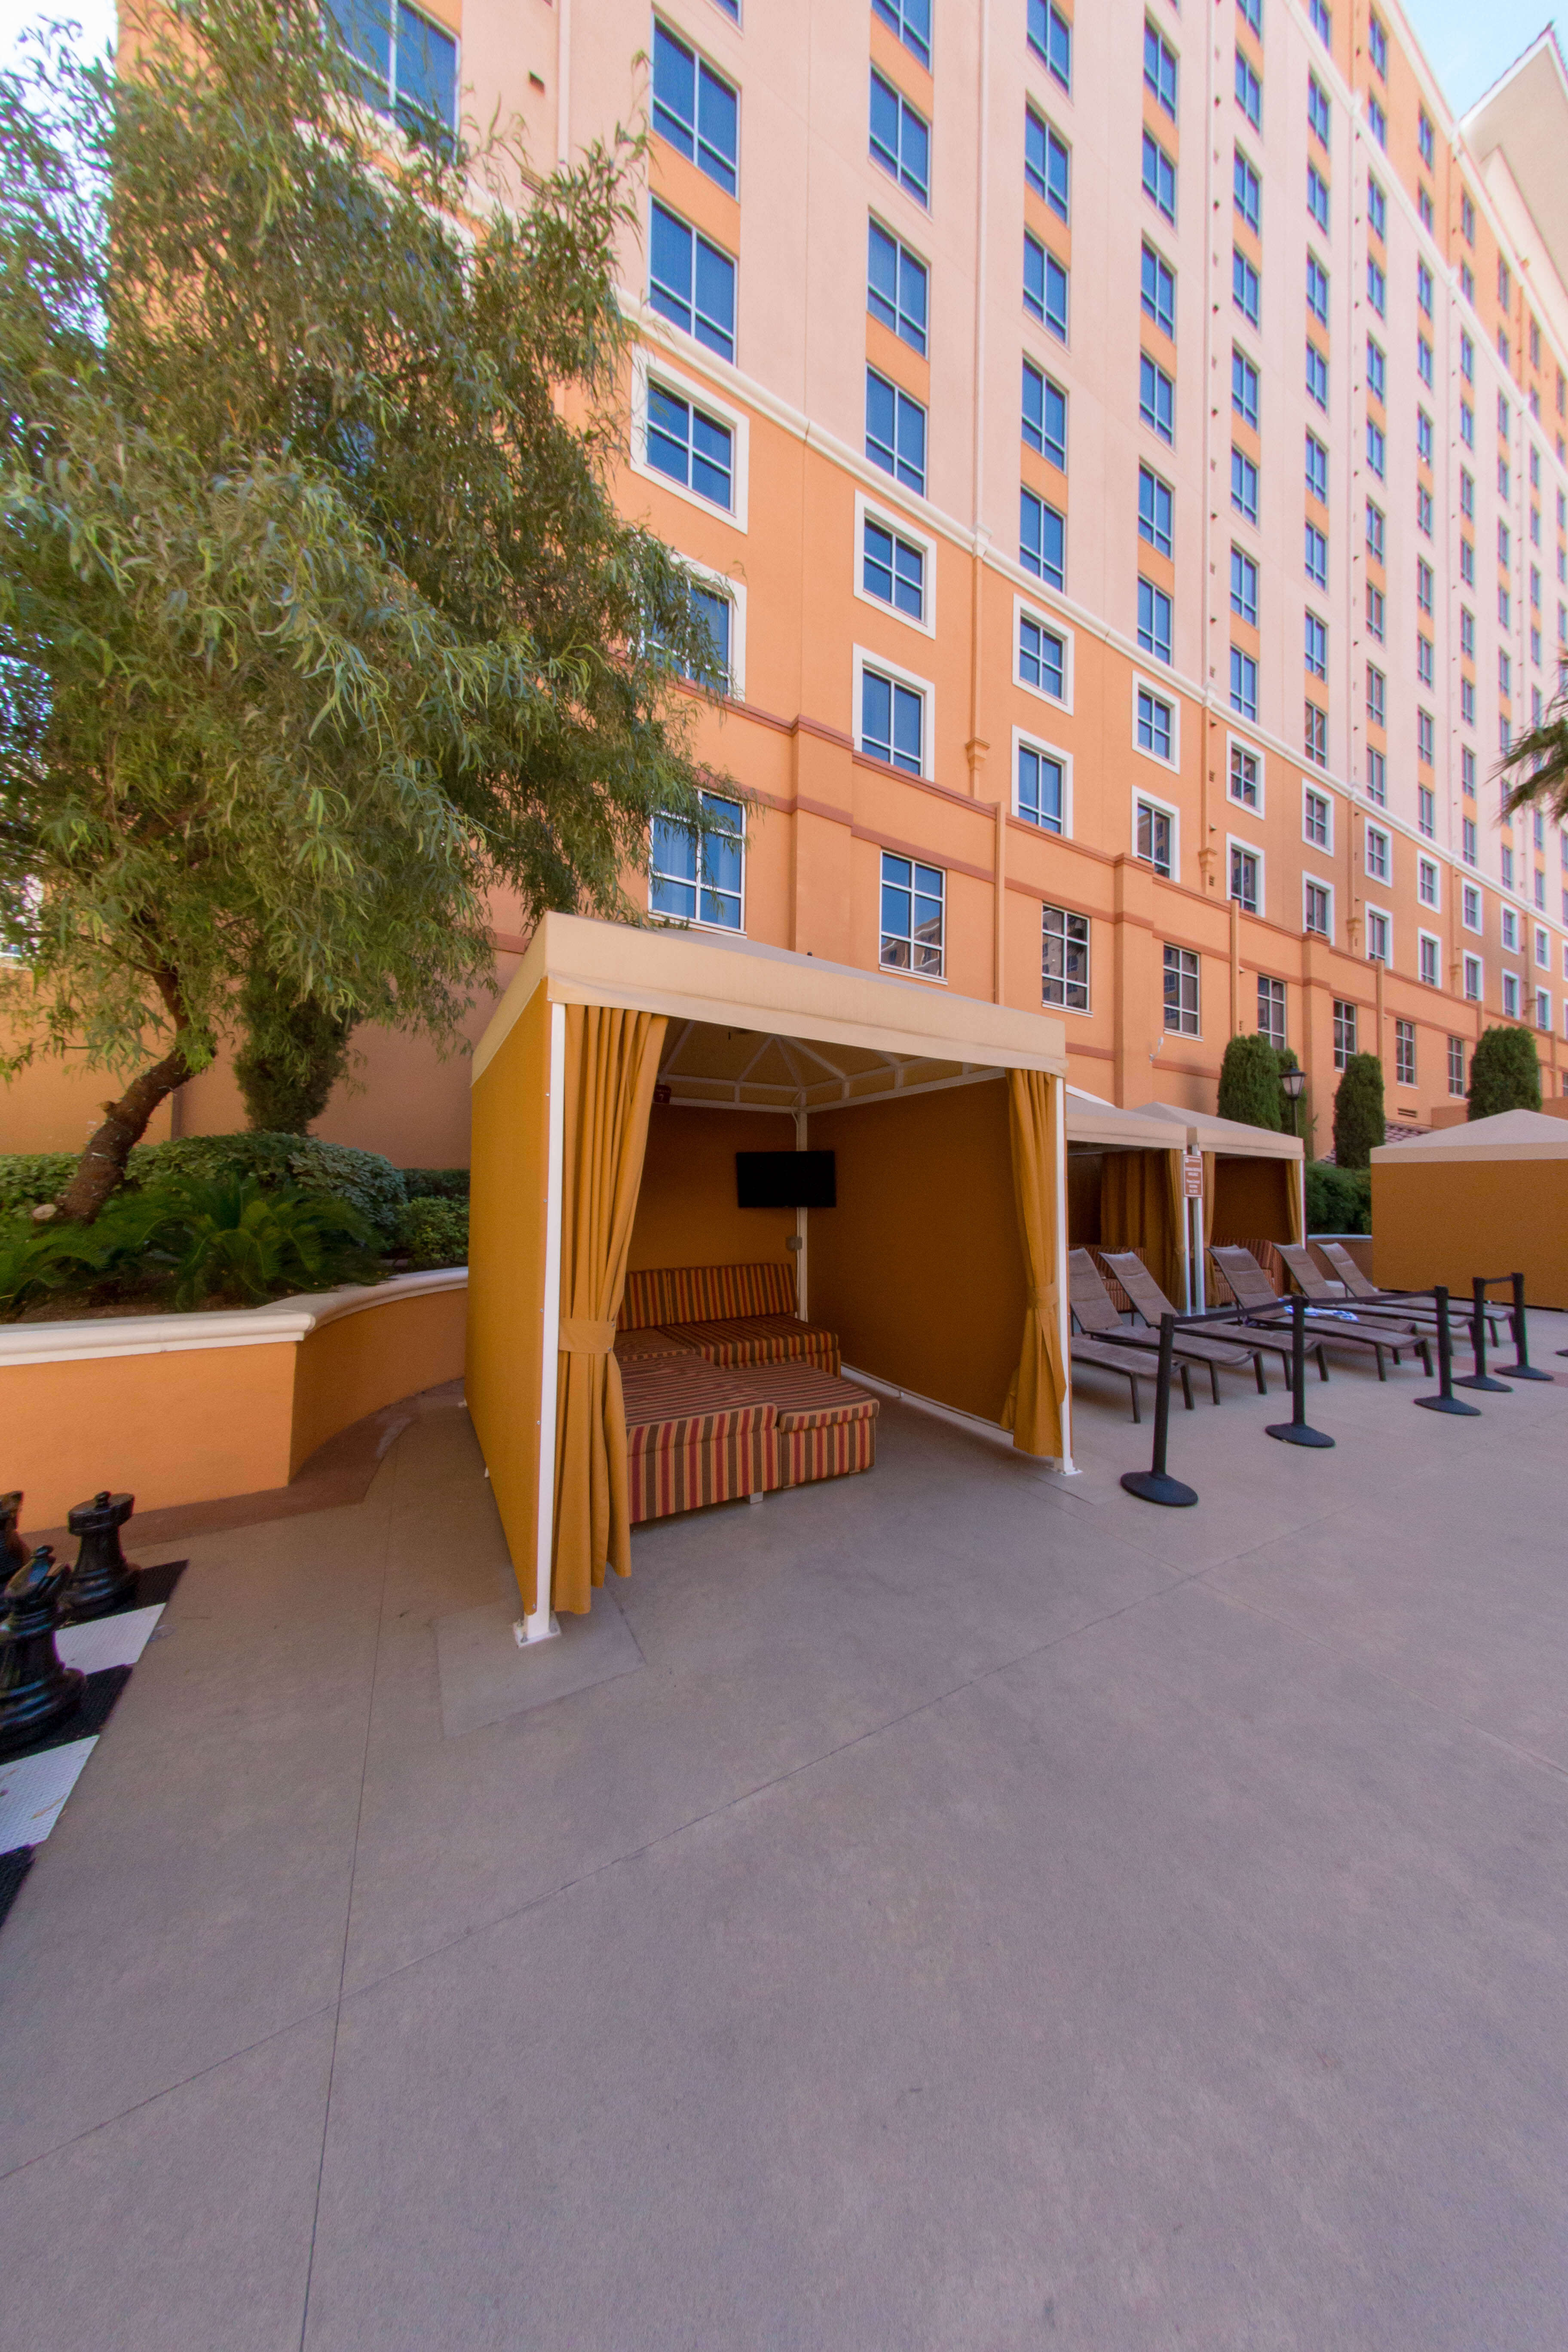 Wyndham Hotel Pool Area in Las Vegas - Cabanas and Shade Sail by Metro Awnings